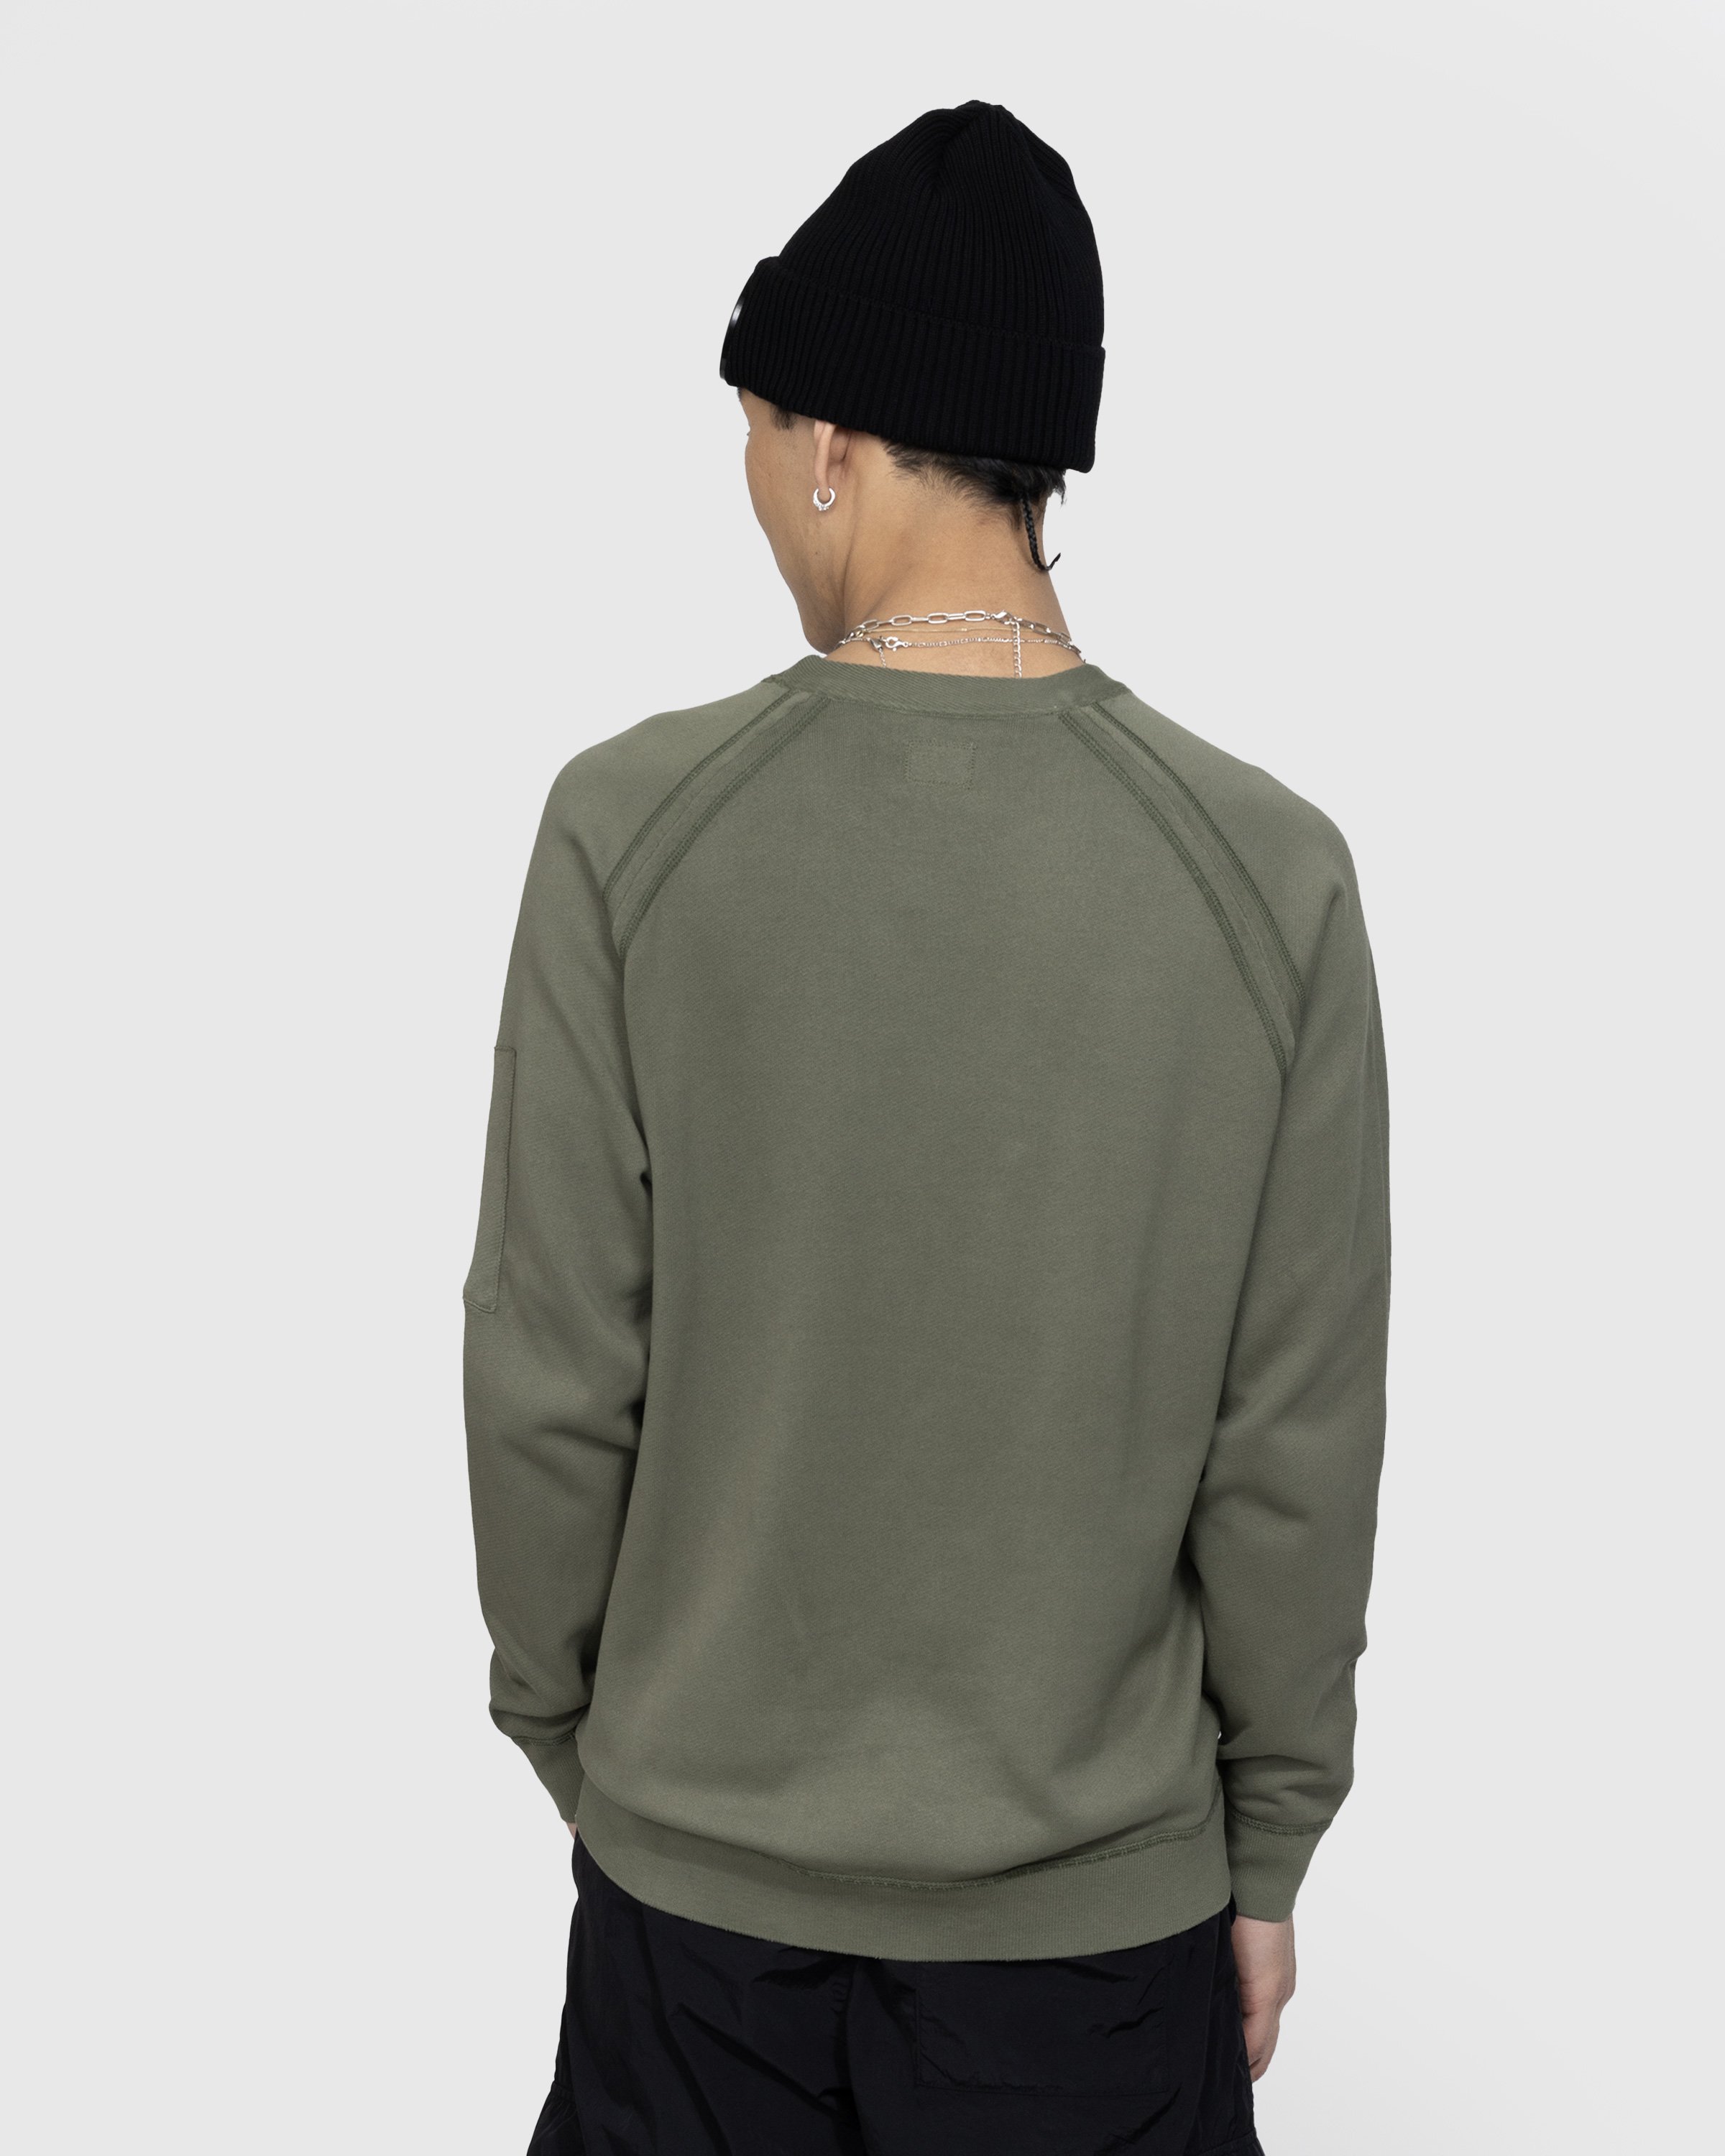 C.P. Company - Light Terry Knitted Sweatshirt Bronze Green - Clothing - Green - Image 3